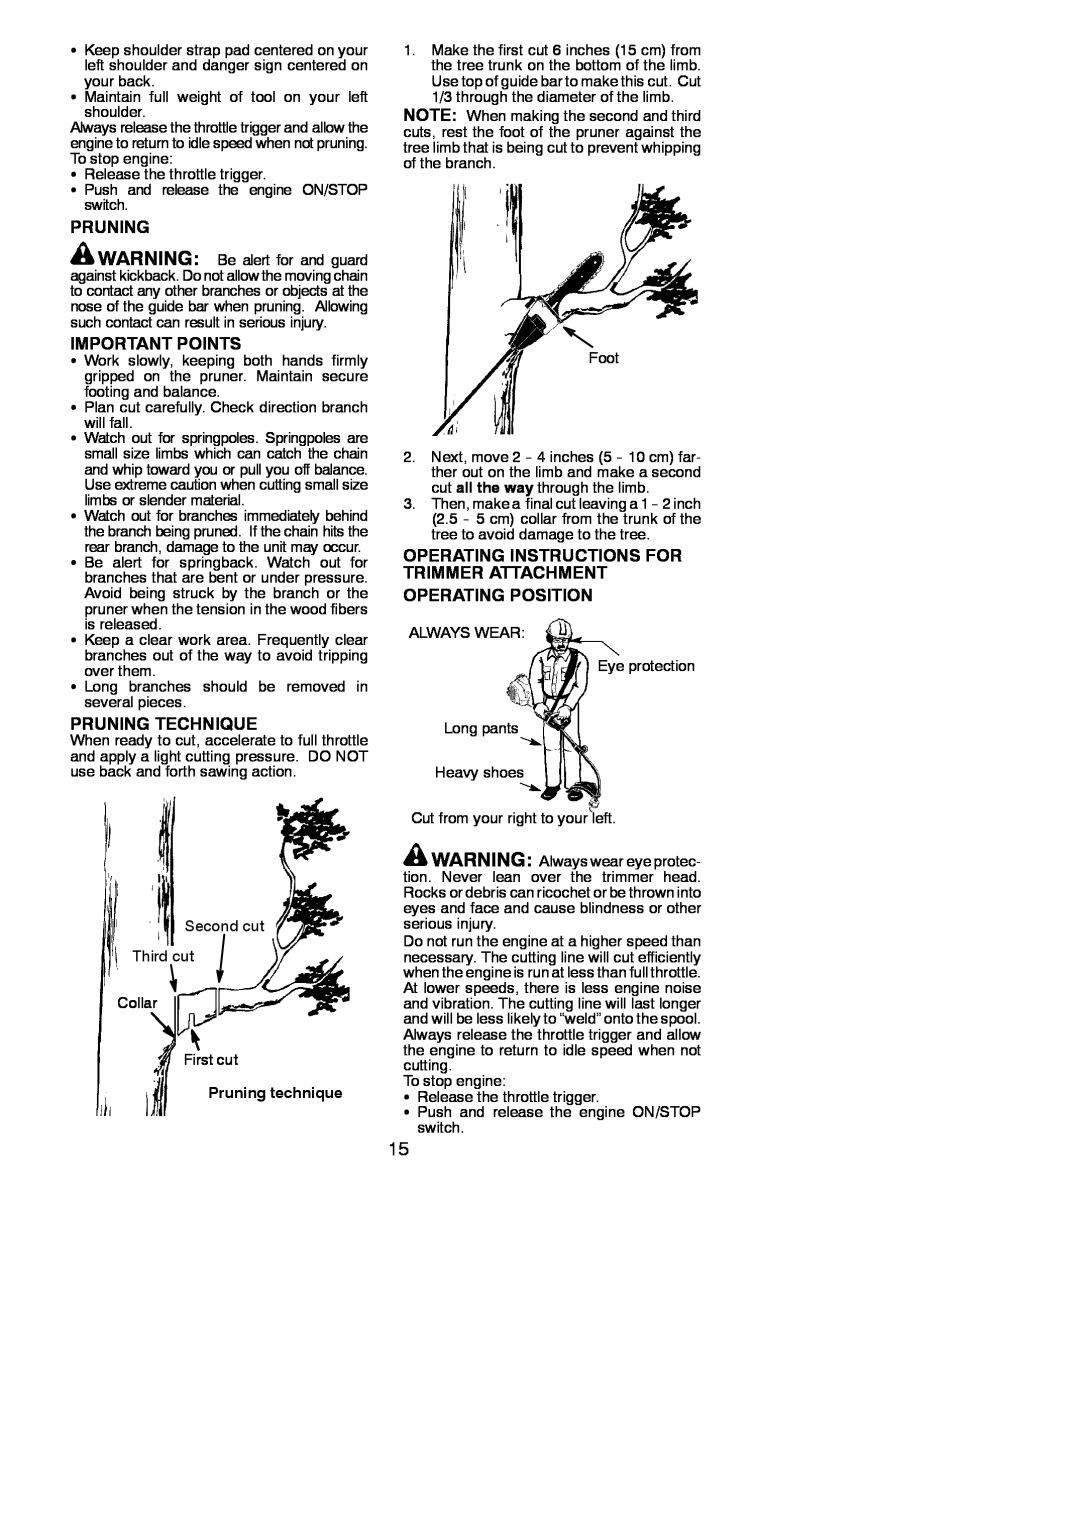 Poulan 115224926 Important Points, Pruning Technique, Operating Instructions For Trimmer Attachment Operating Position 